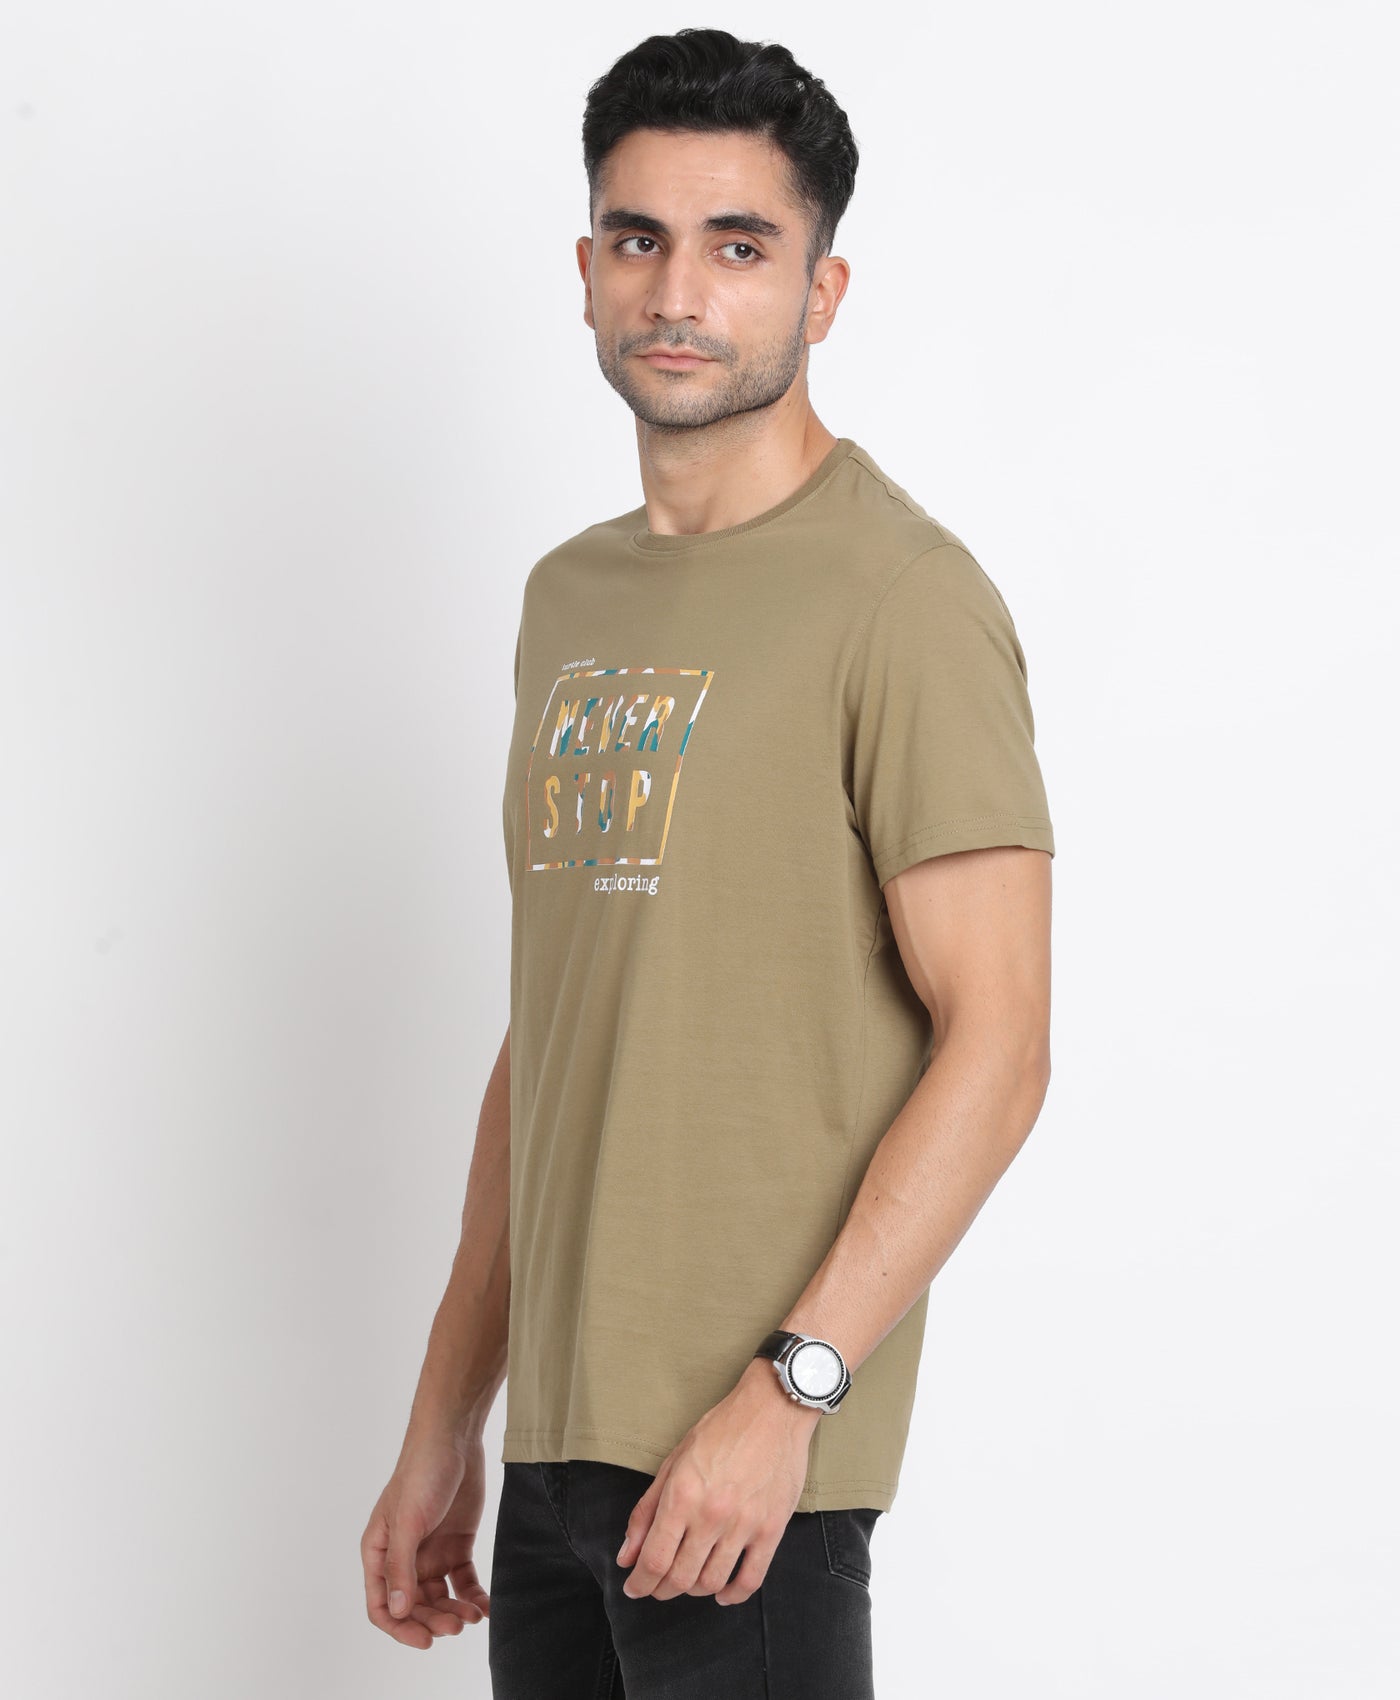 Knitted Olive Plain Crew Neck Half Sleeve Casual T-Shirt